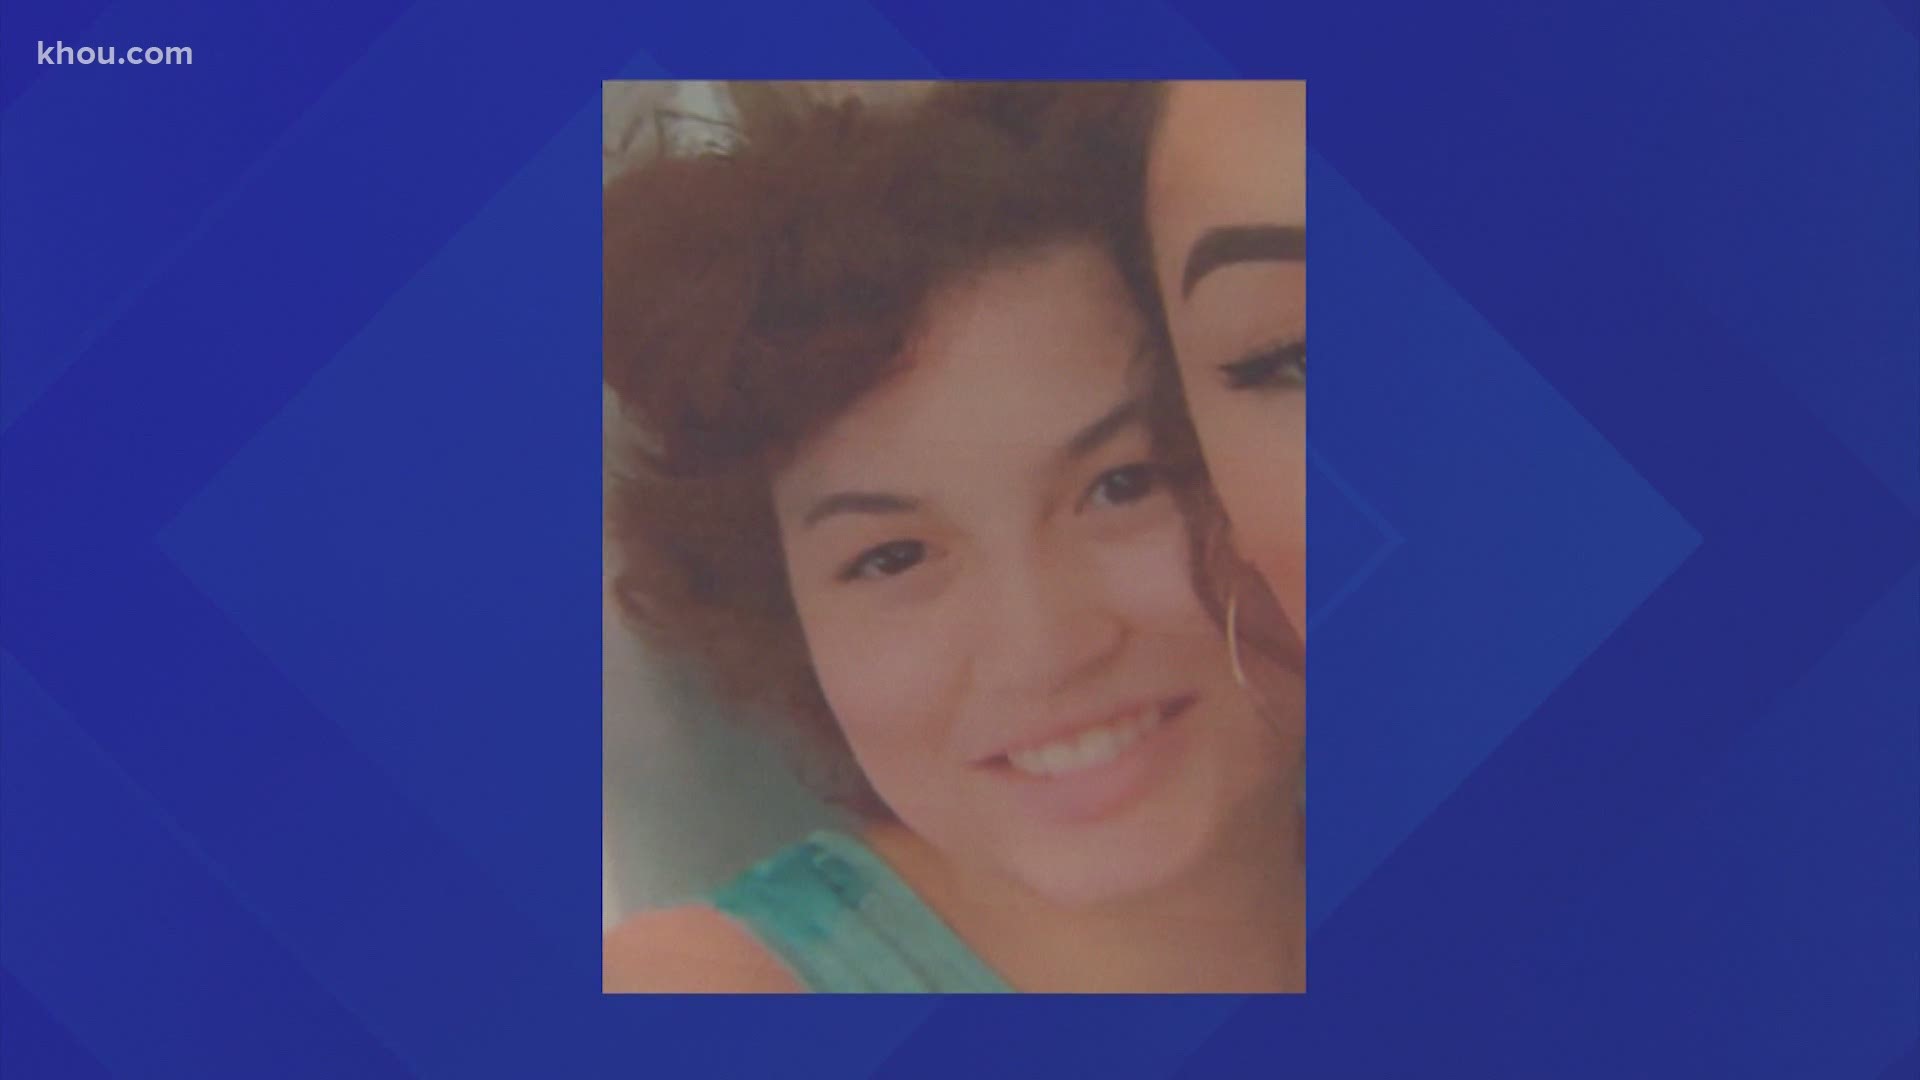 A 20-year-old woman with autism who had been missing since Sept. 11 was found safe Tuesday, according to Texas EquuSearch.